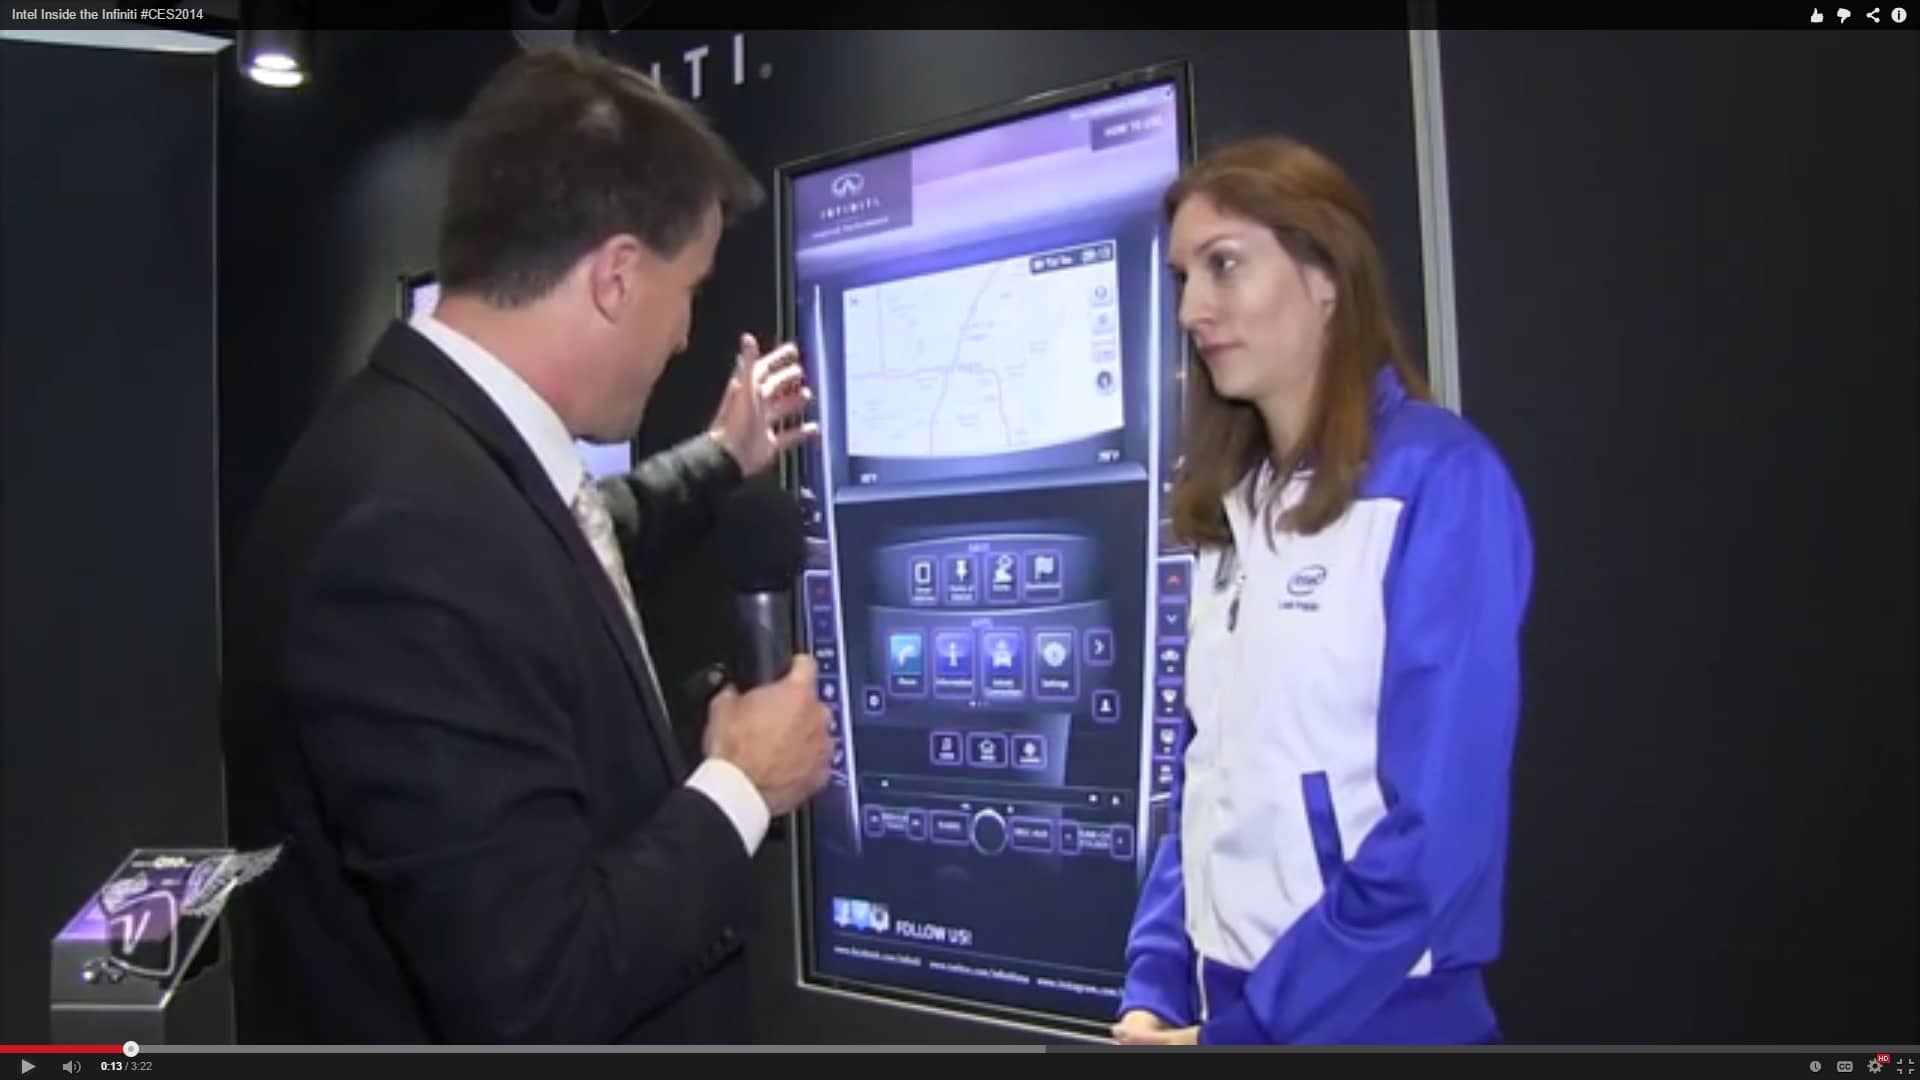 Lindsay Sech talks about Intel's efforts to be inside the car; in case, inside an Infiniti at International CES 2014.